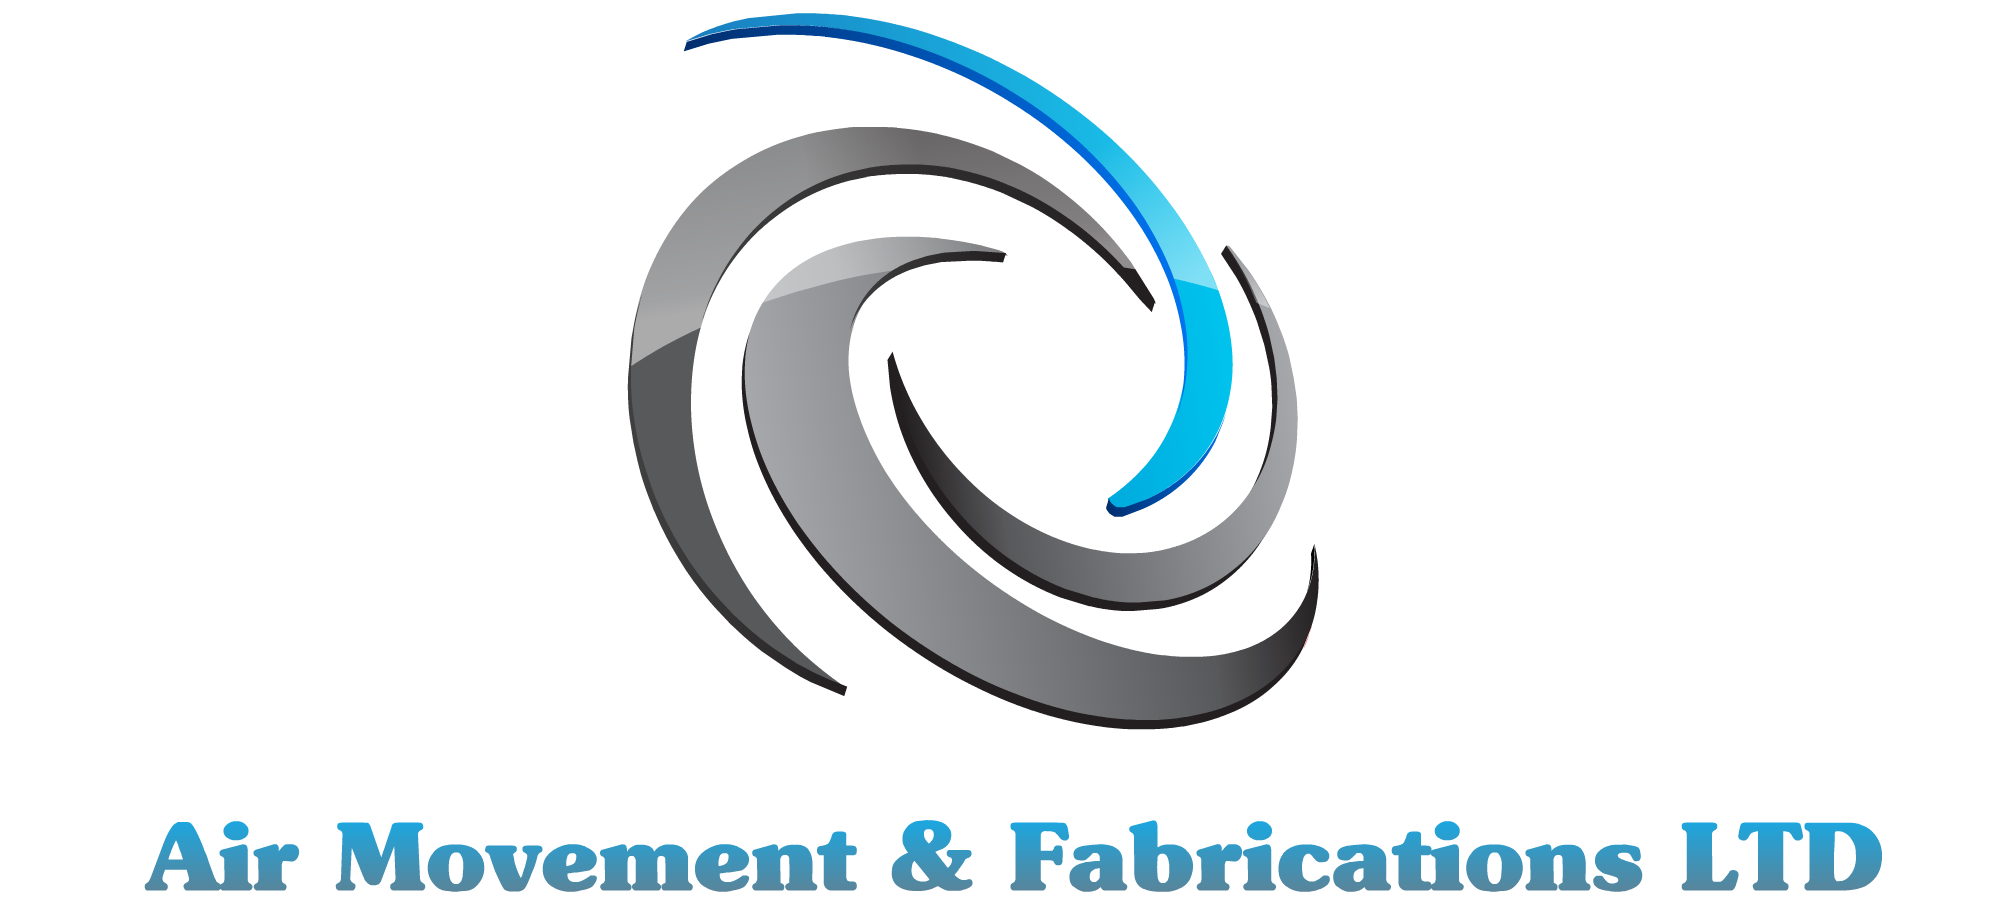 Air Movement and Fabrication Ltd